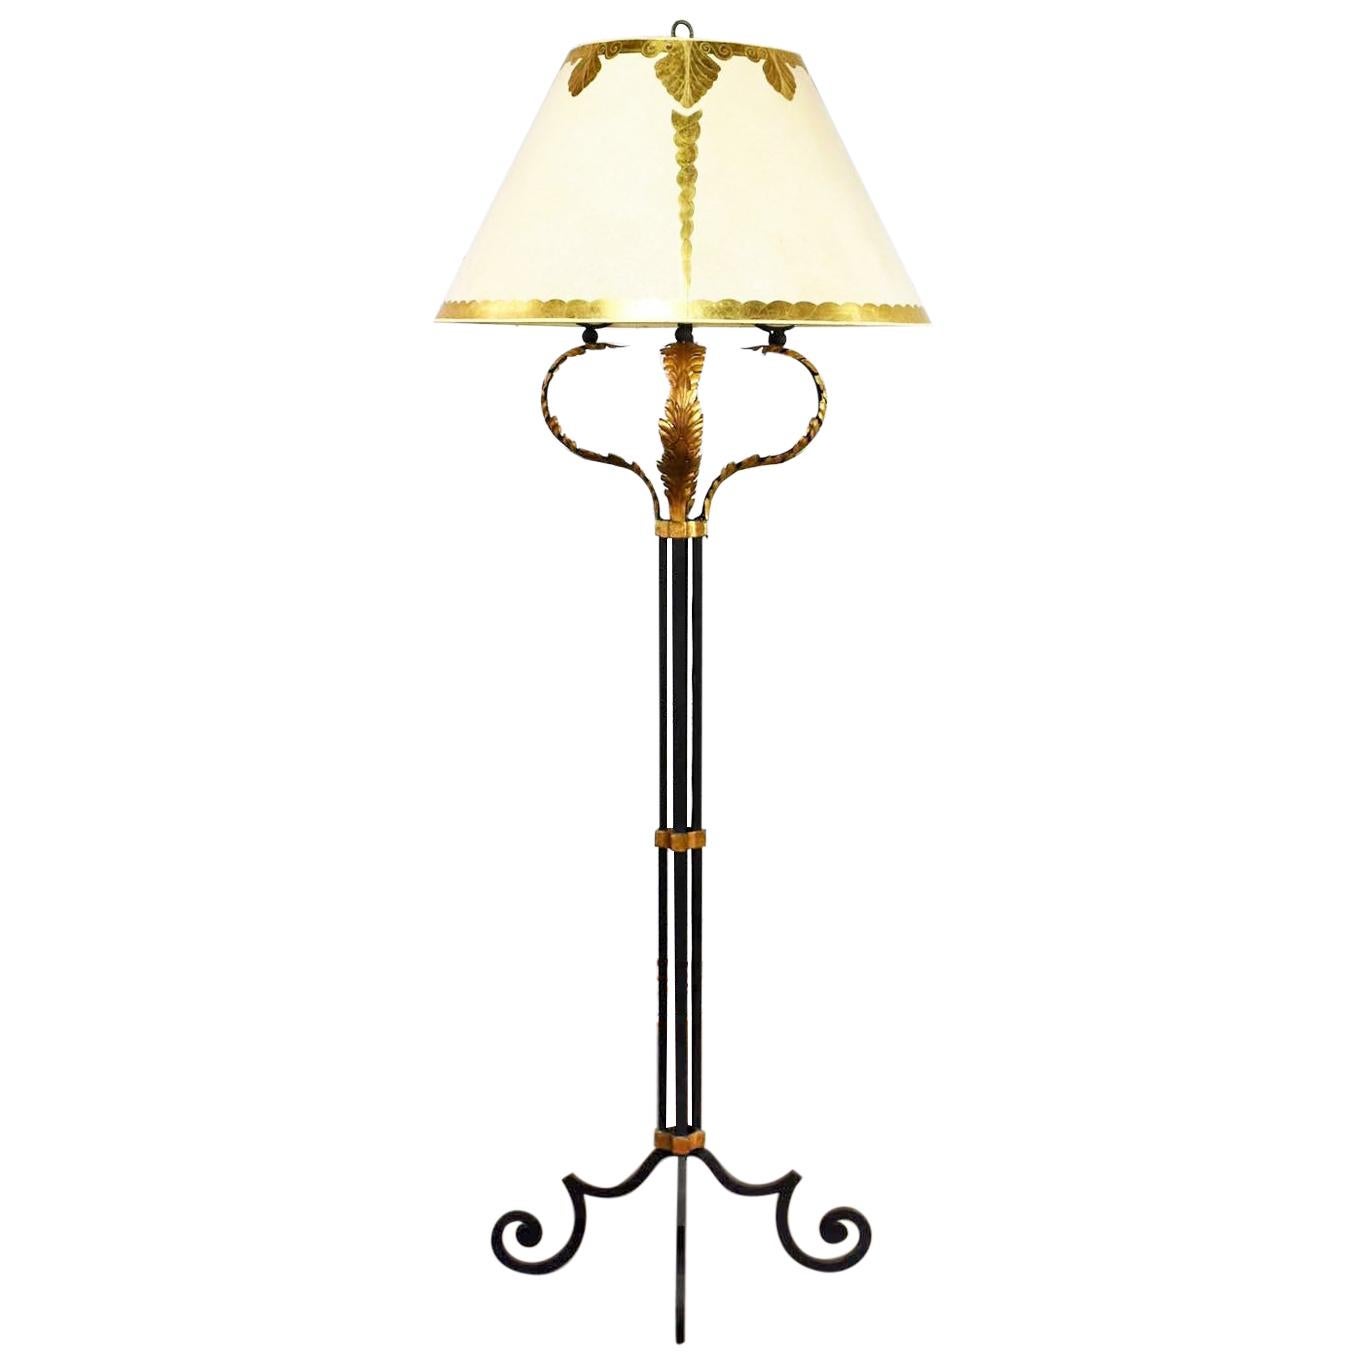 Monumental Neoclassical Iron Floor Lamp Acanthus Leaf Design & Parchment Shade